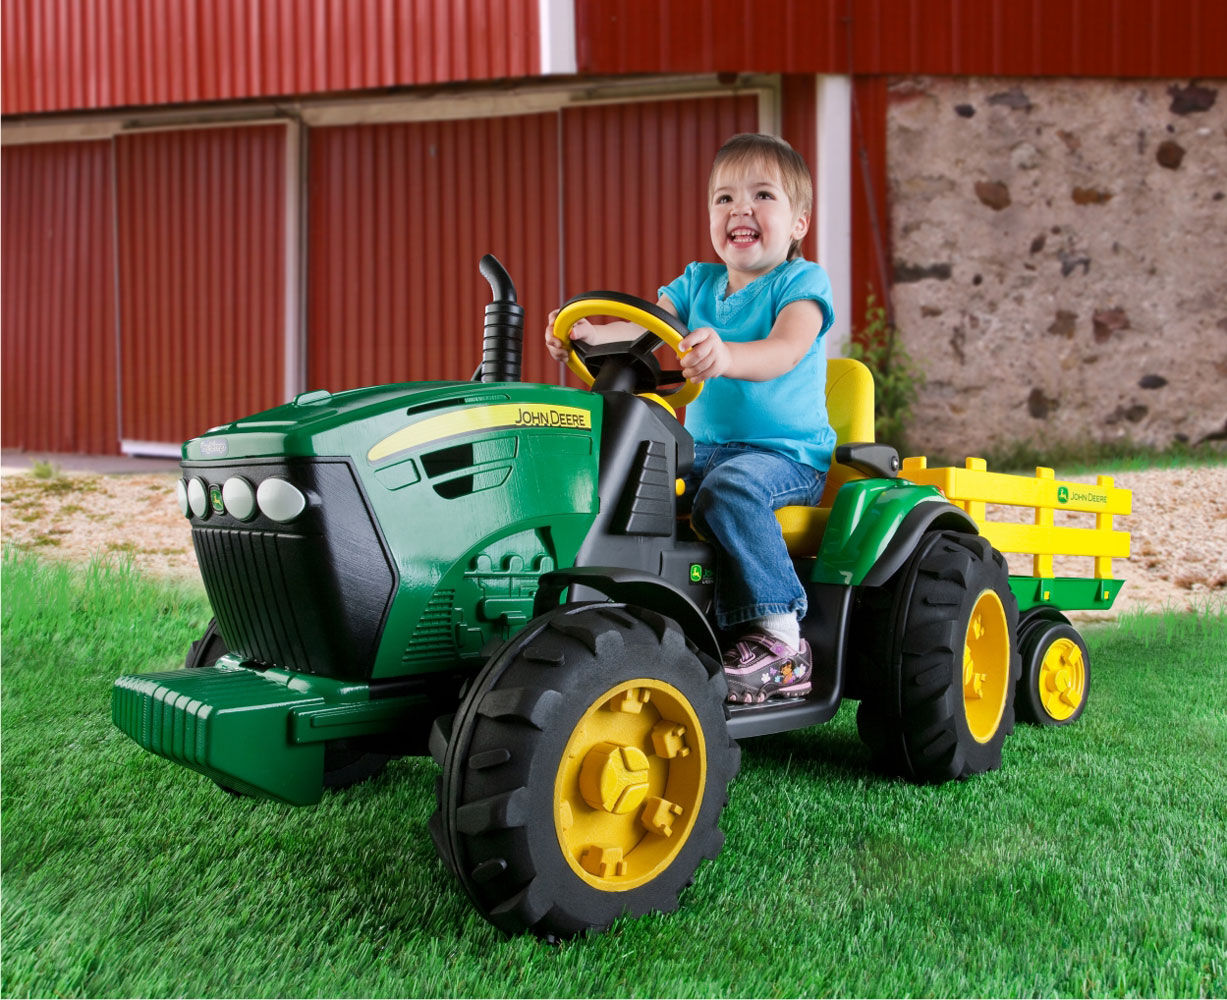 john deere ride on tractor and trailer